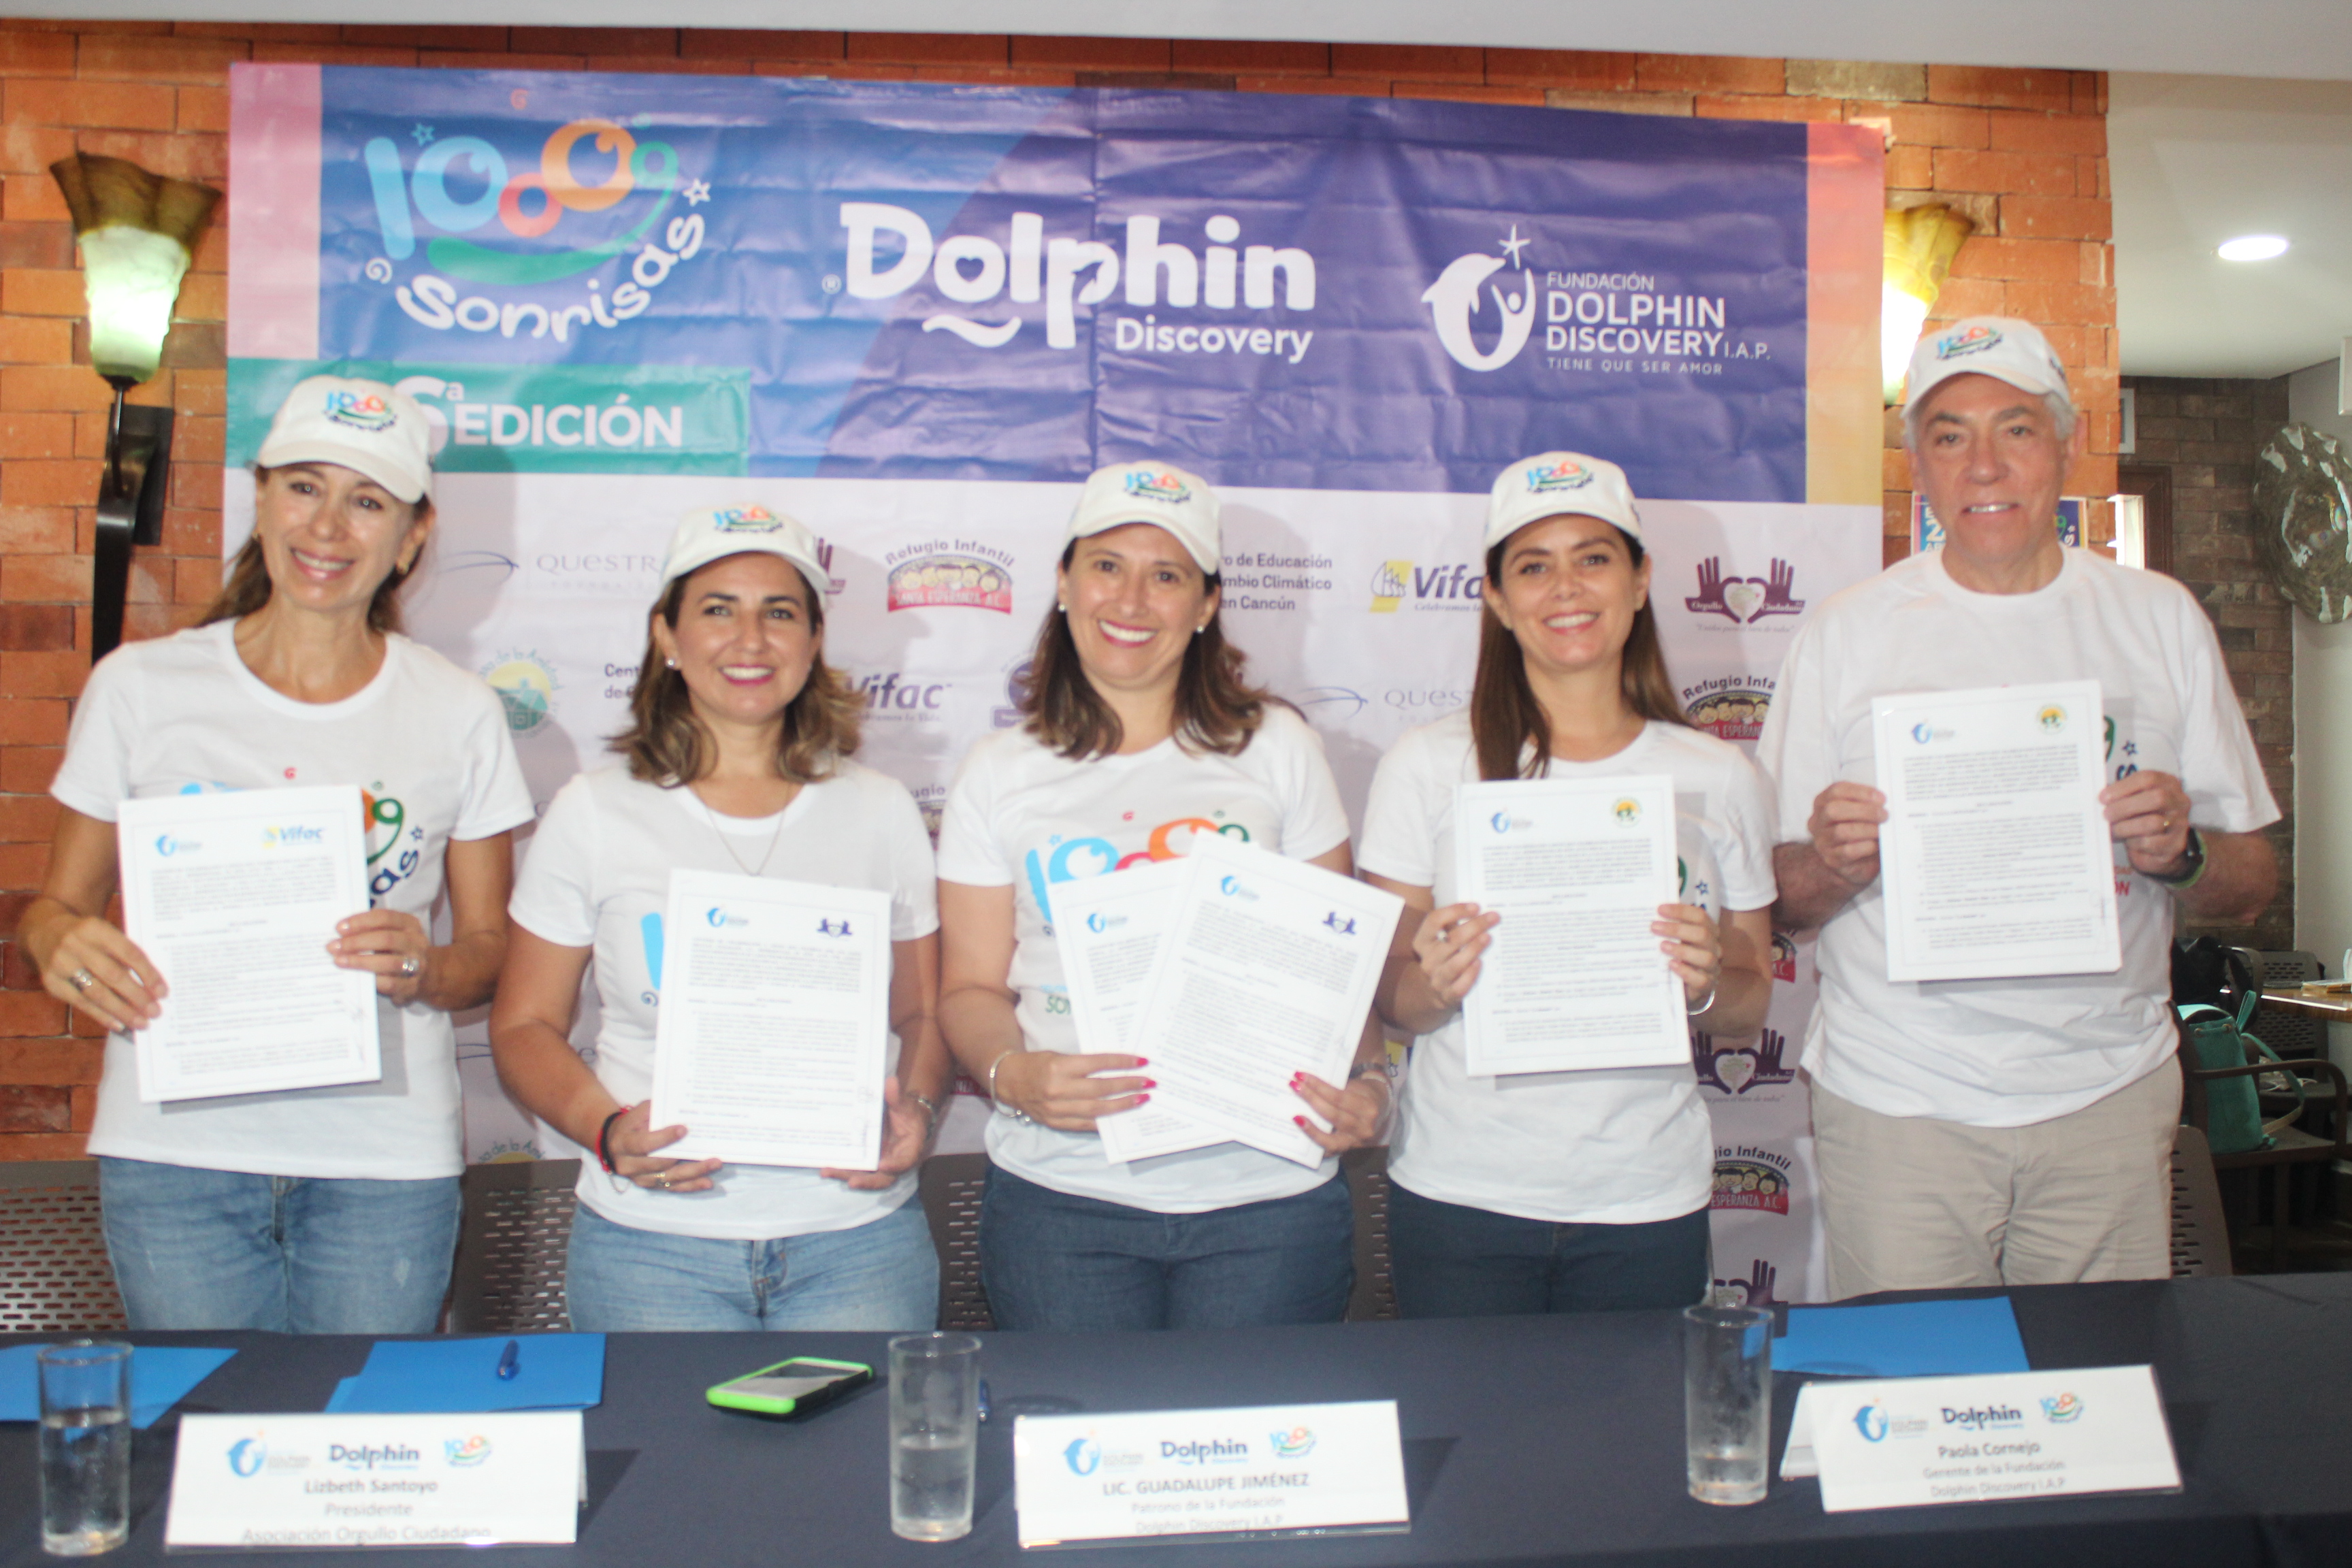 FUNDACI�N DOLPHIN DISCOVERY SIGNED AN AGREEMENT WITH BENEFITED ASSOCIATIONS